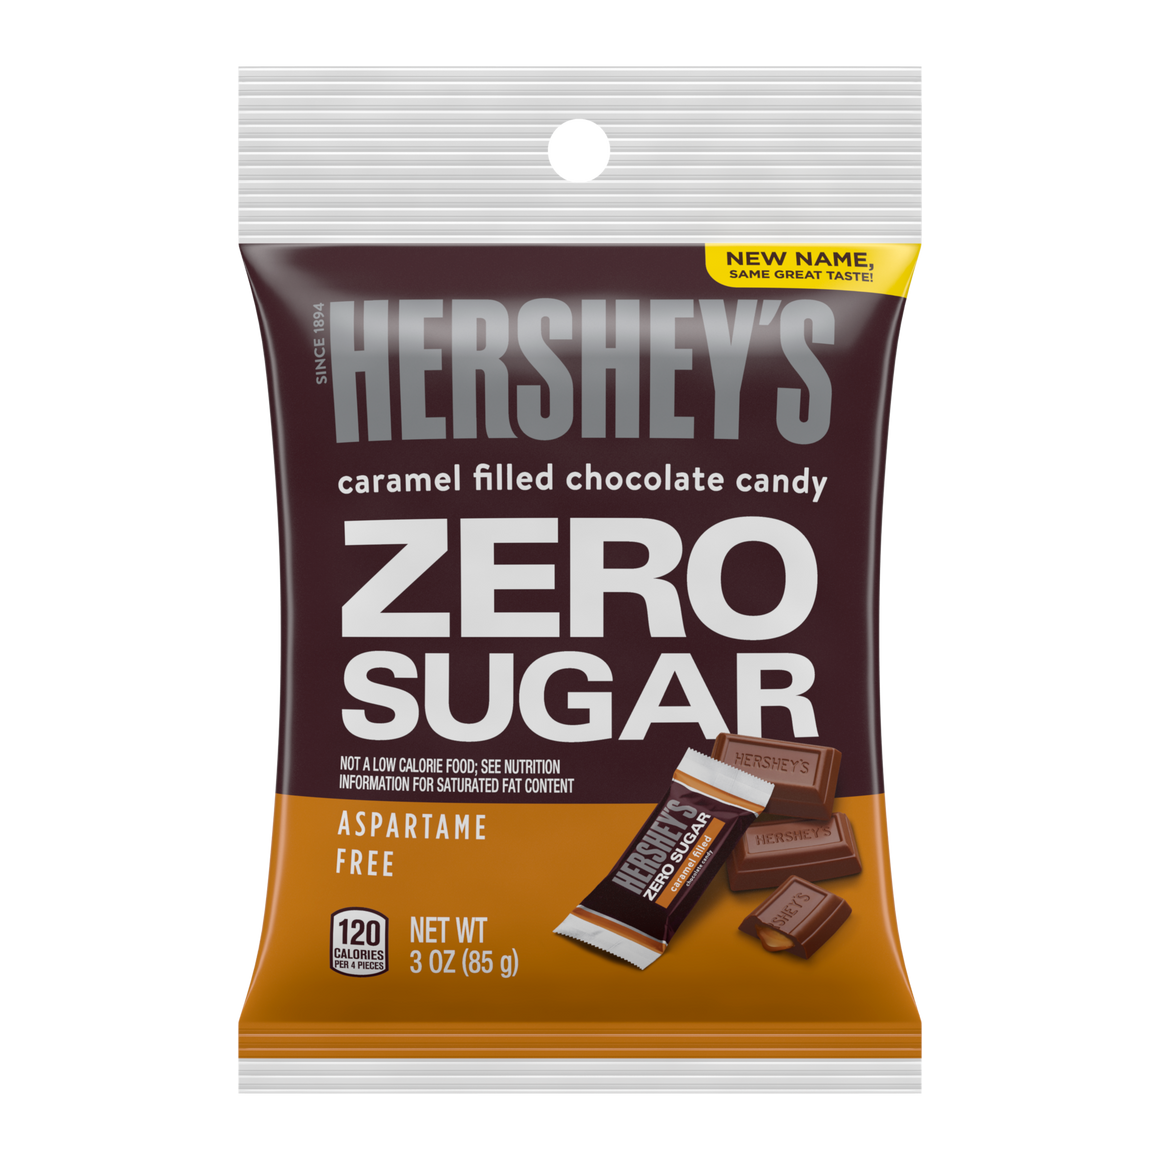 Hershey's Zero Sugar Caramel Filled Chocolate Candy 3 oz. Bag. For fresh candy and great service, visit www.allcitycandy.com